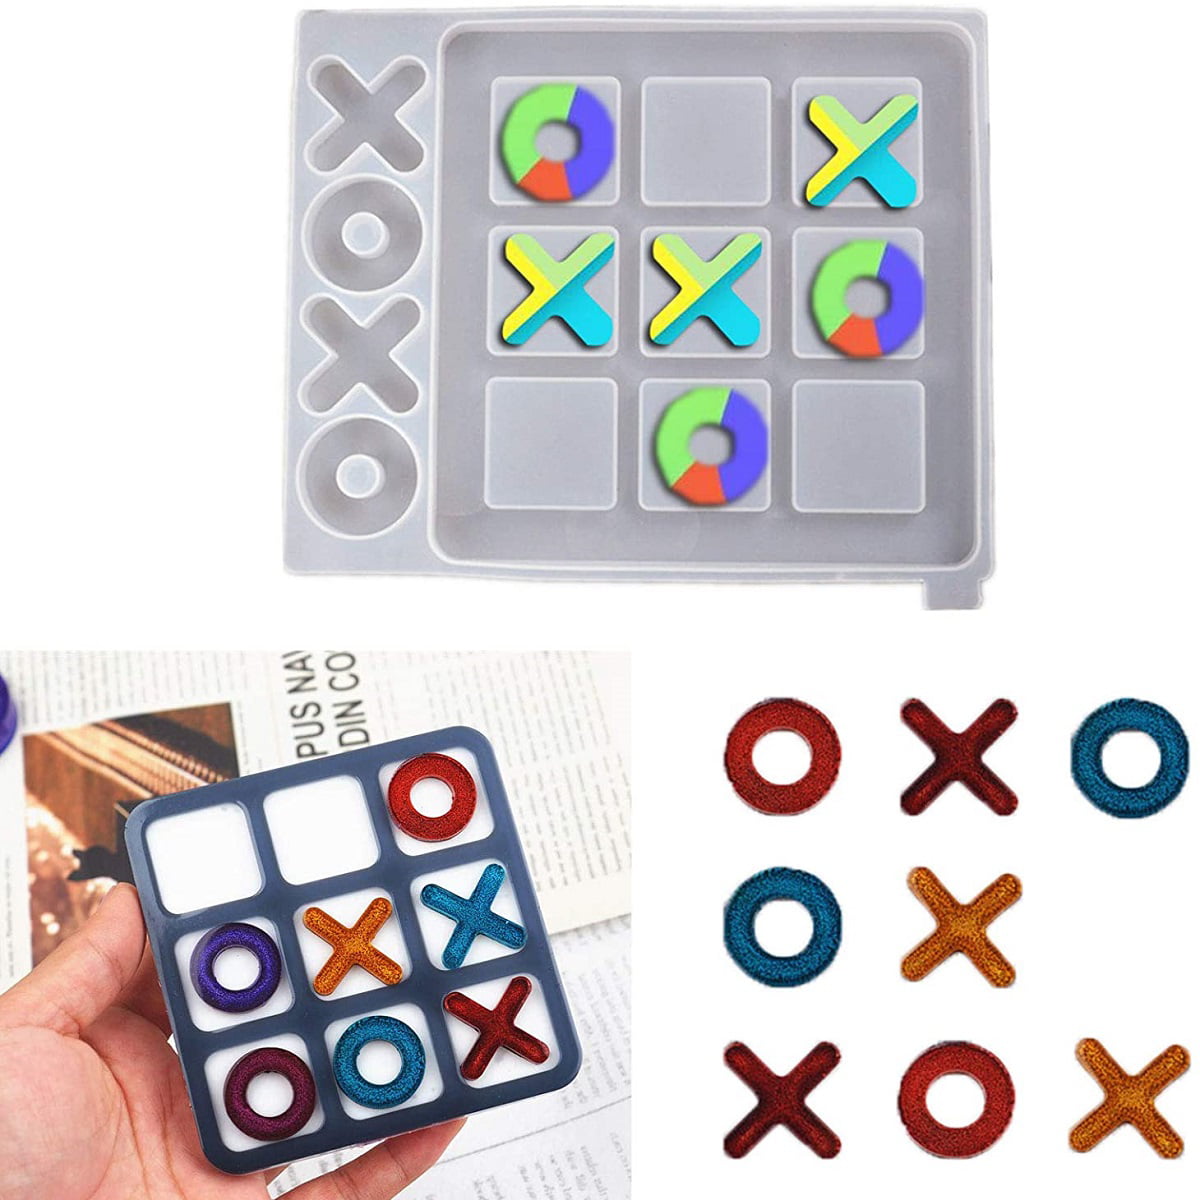 Resin Casting Tic Tac Toe Game Mold XO Silicone Resin Mold Jewelry Make 